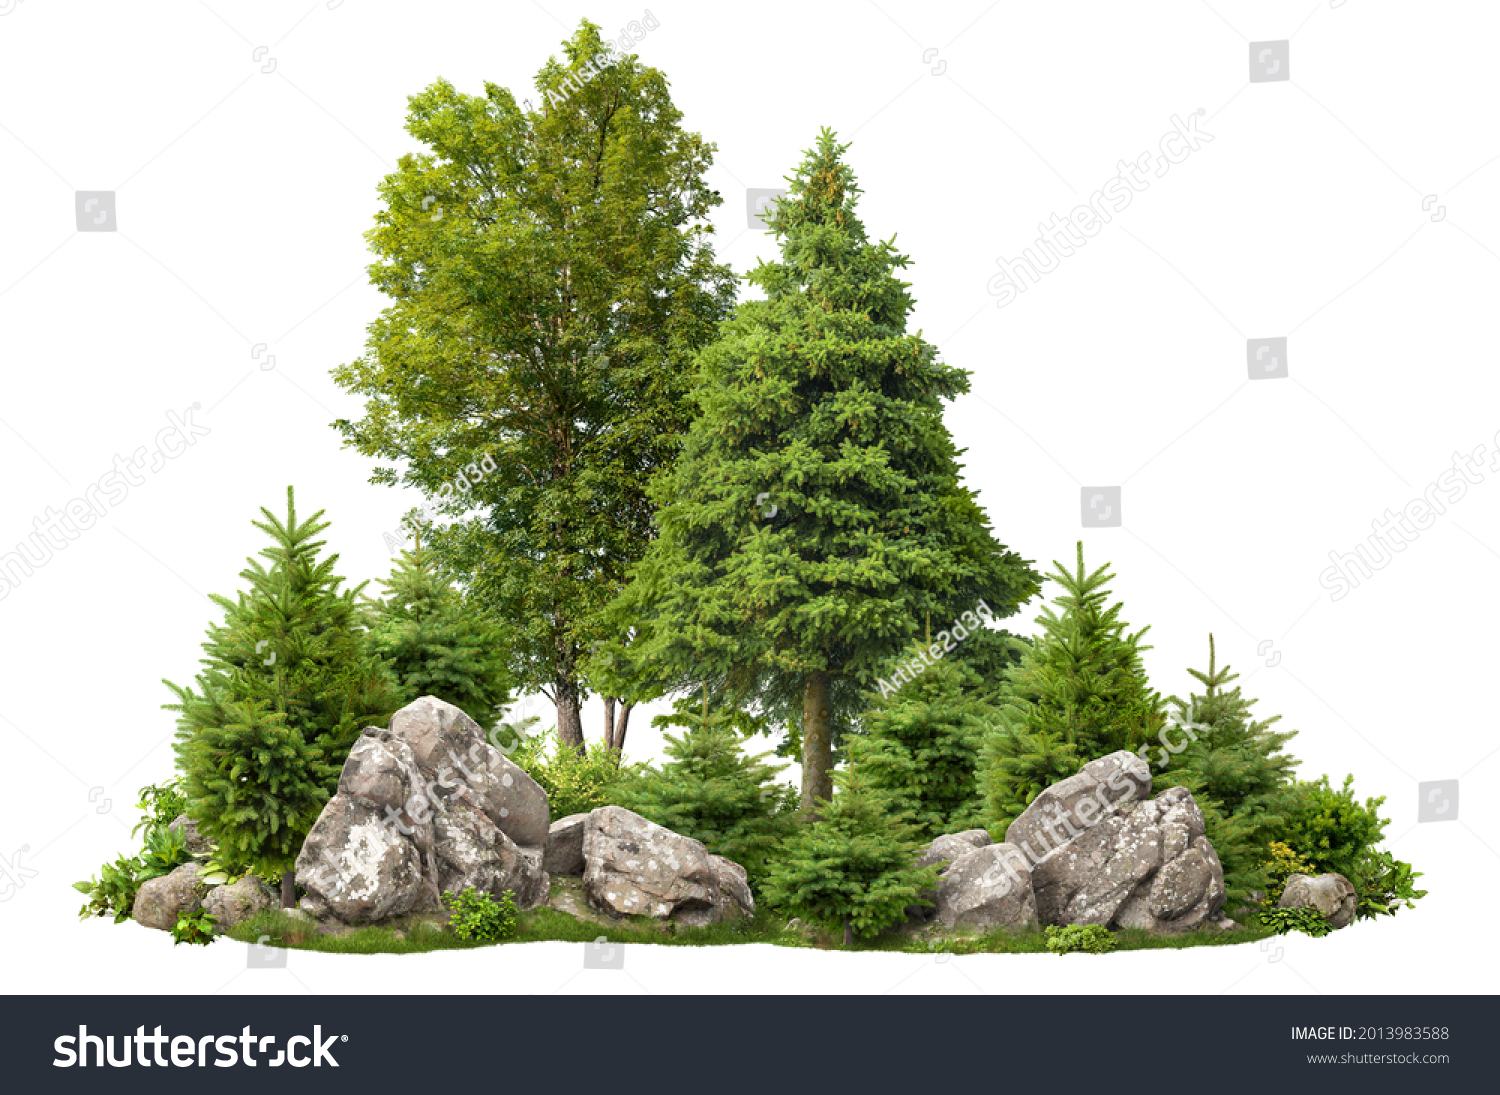 Cutout rock surrounded by fir trees. Garden design isolated on white background. Decorative shrub for landscaping. High quality clipping mask for professionnal composition. Stones in the forest. #2013983588